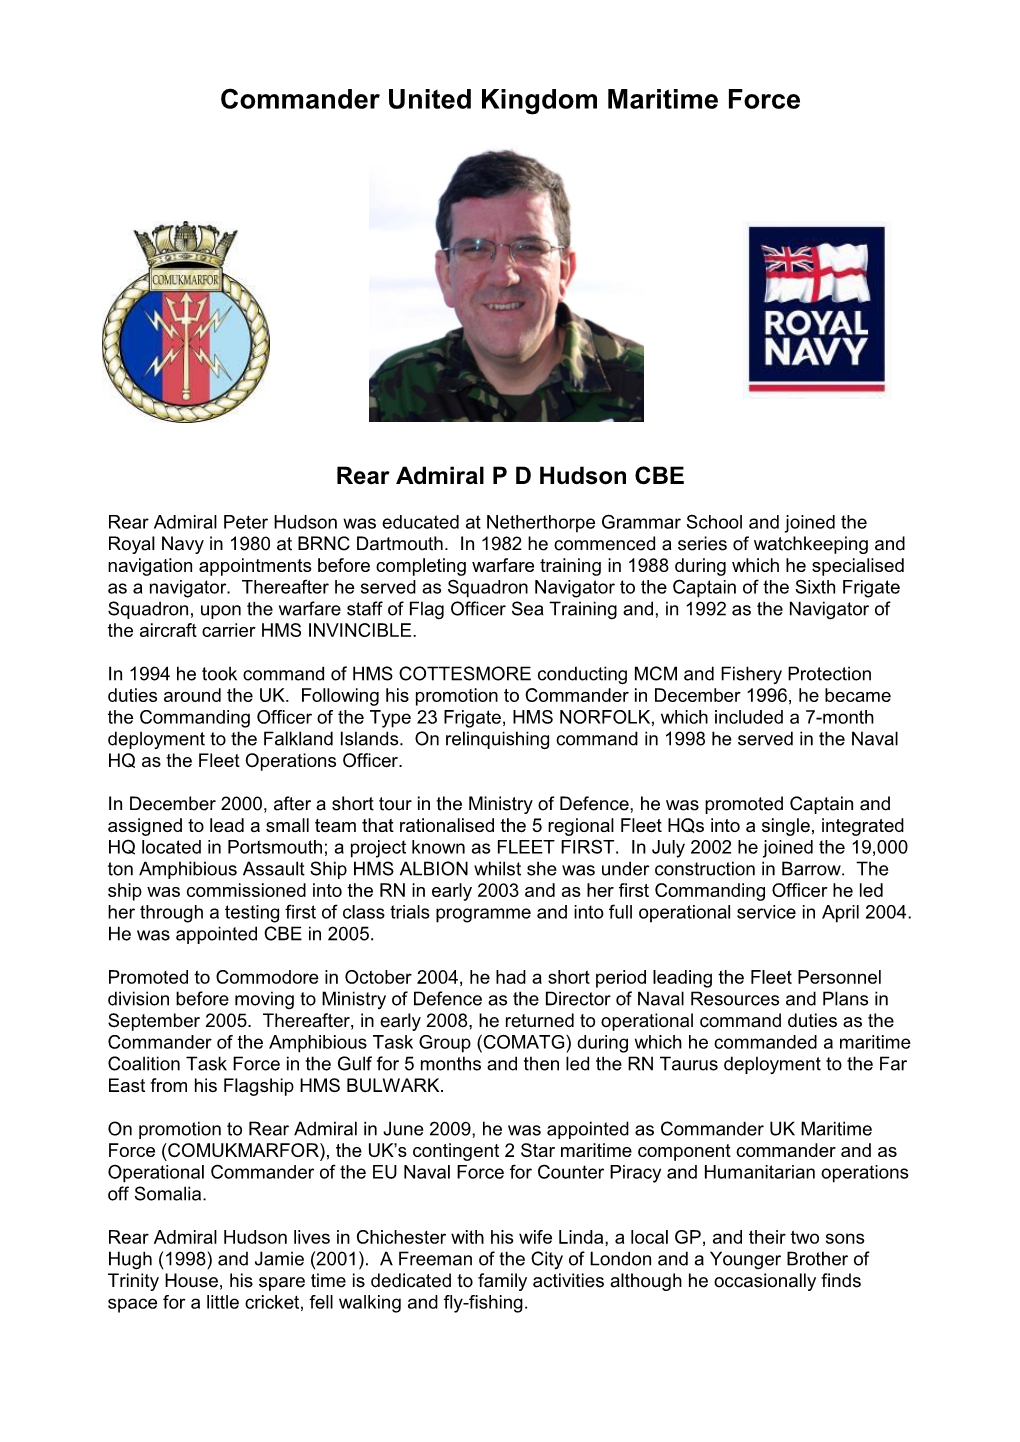 Commodore Peter Hudson Joined the Royal Navy Directly from School In